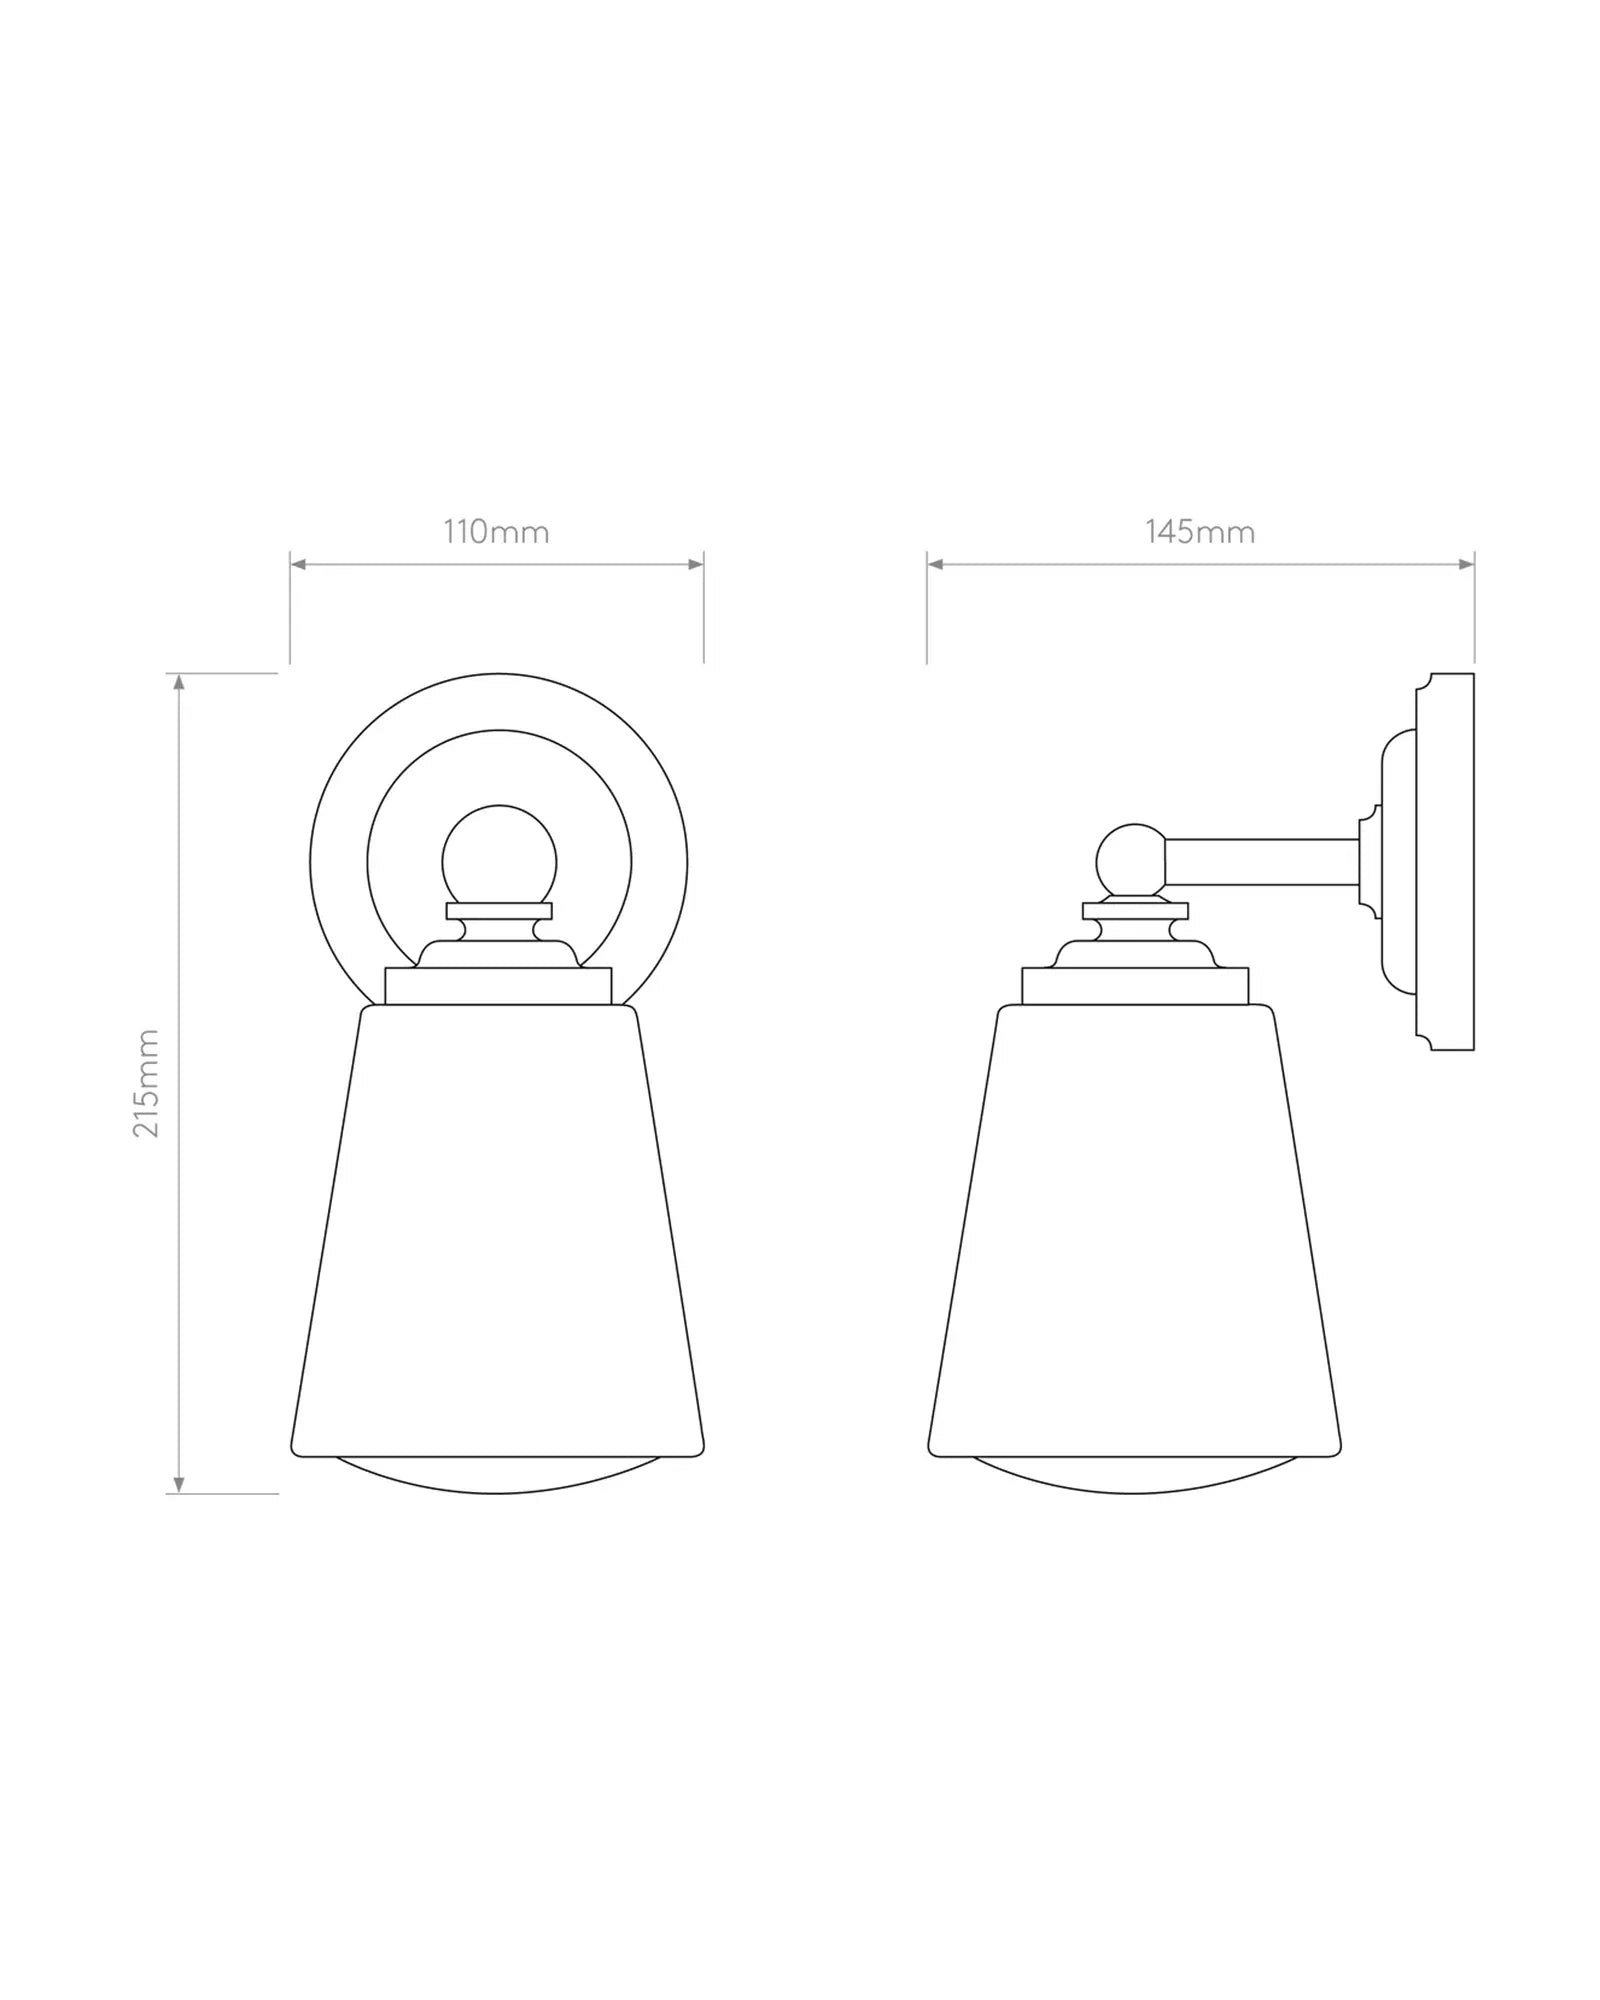 Anton frosted glass and metal bathroom wall light sizes